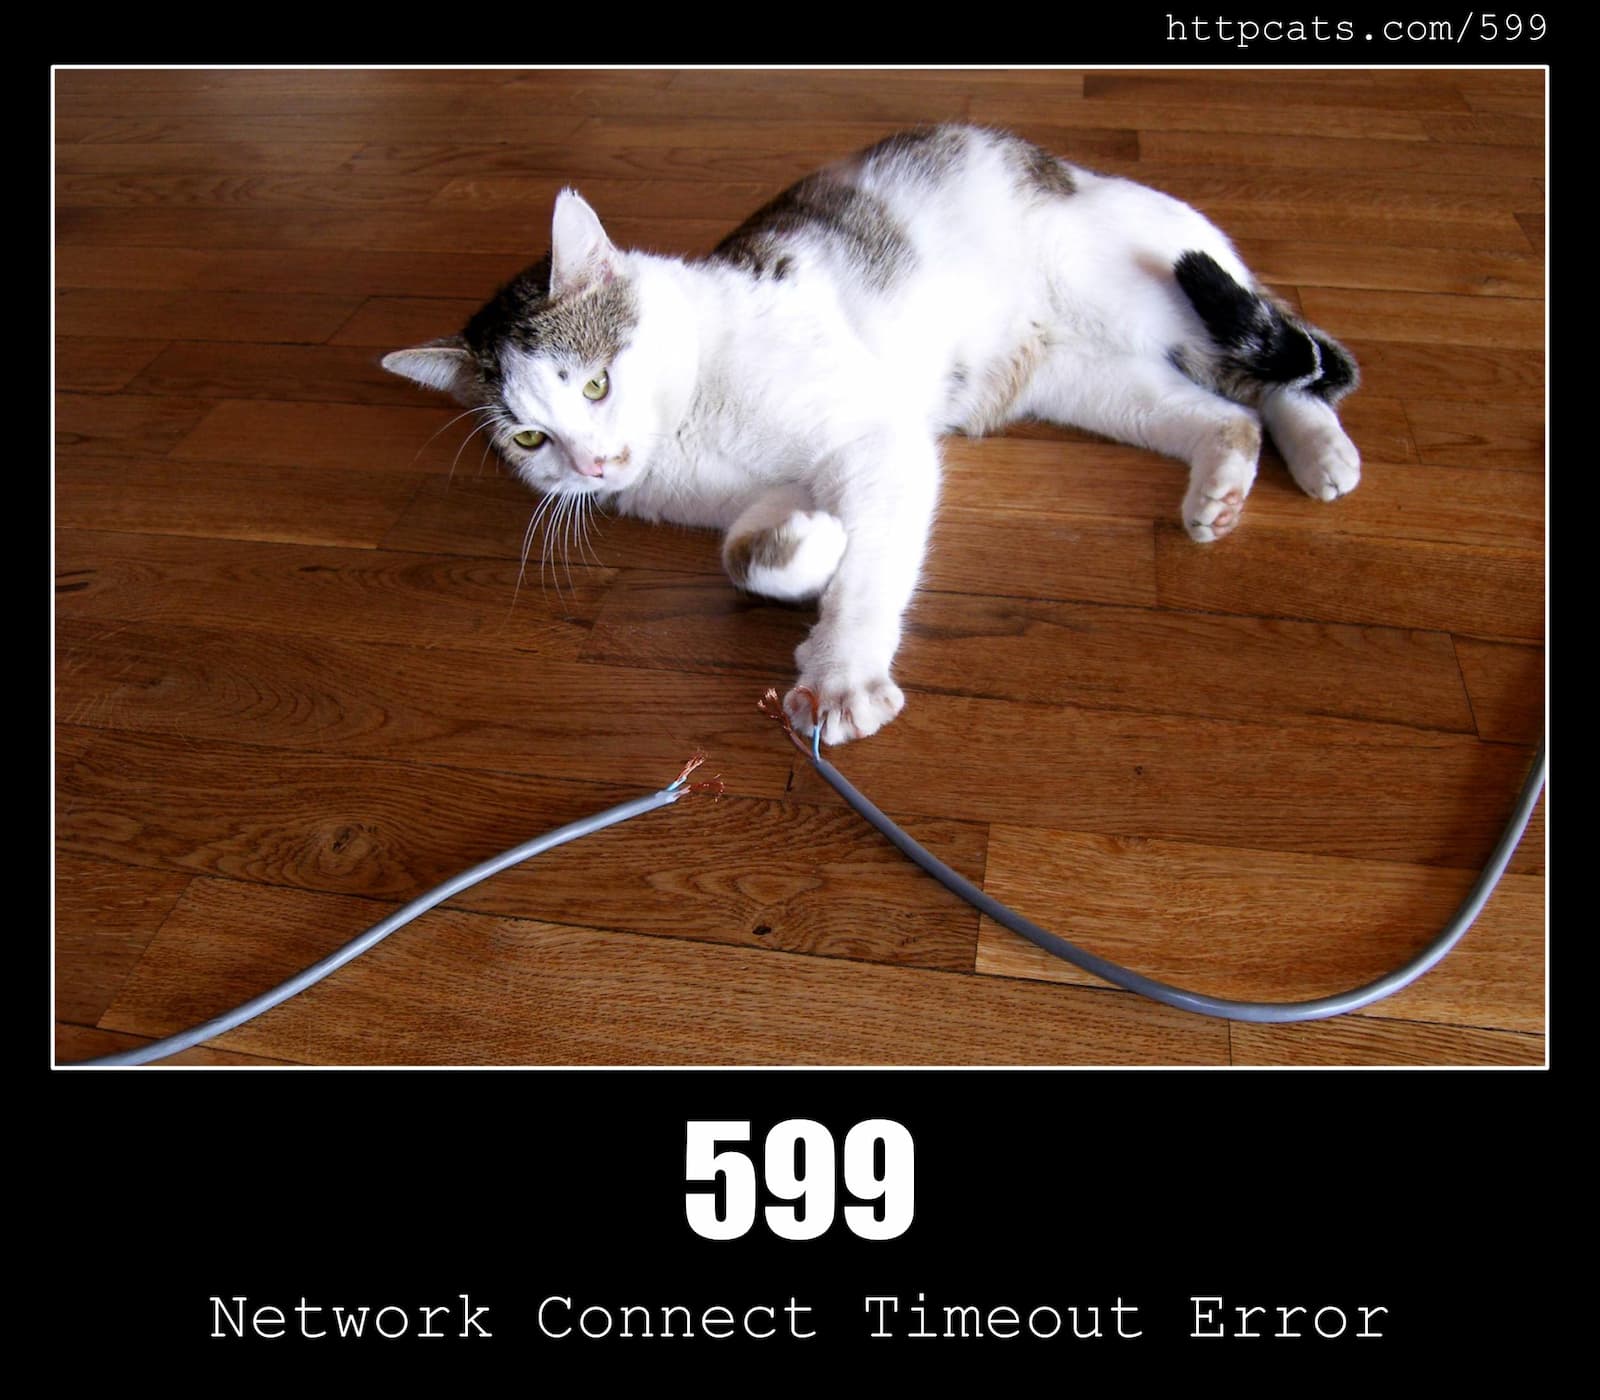 HTTP Status Code 599 Network Connect Timeout Error & Cats